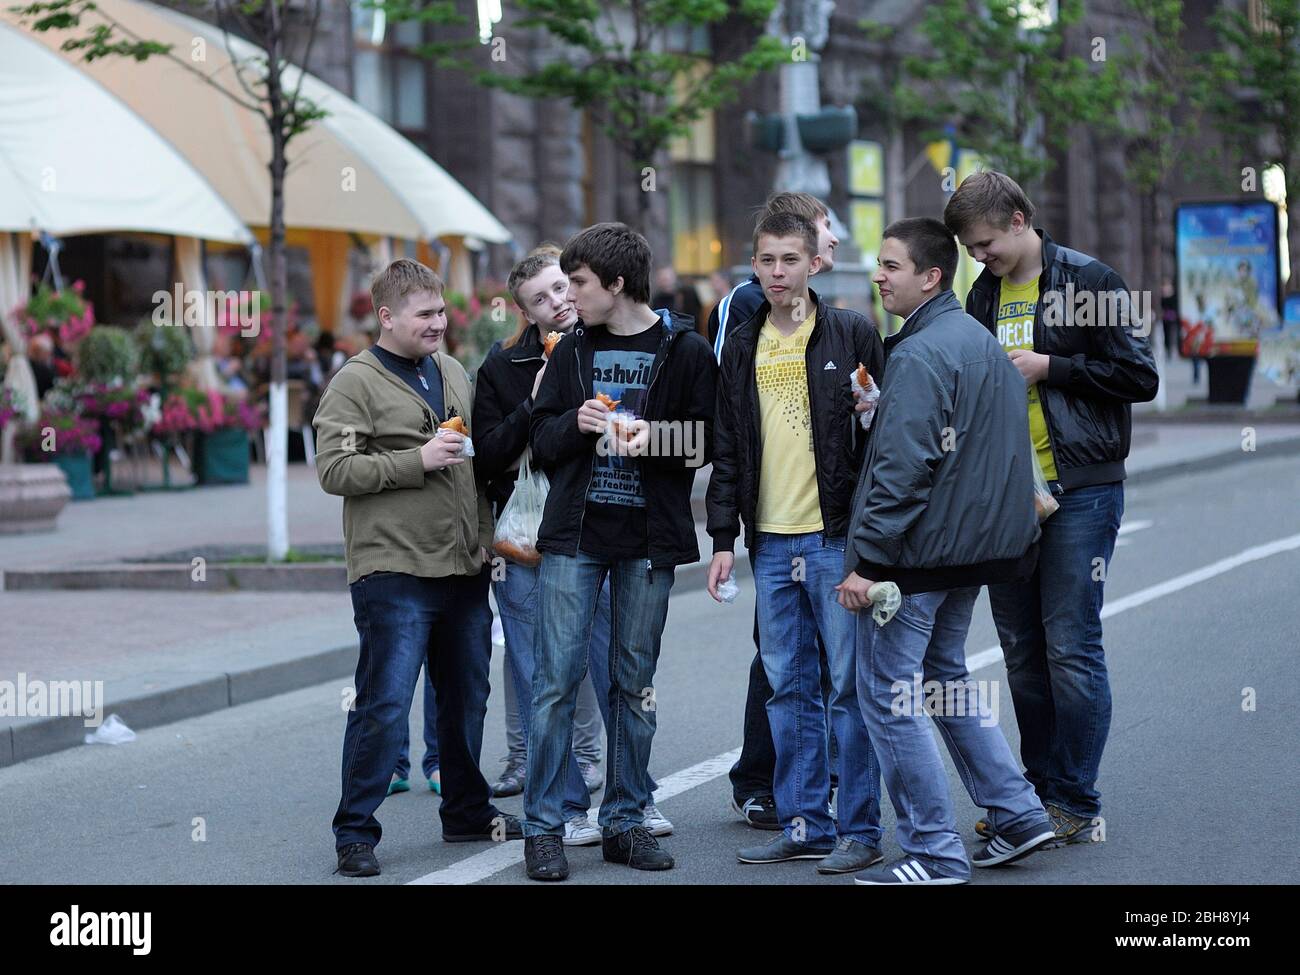 Group of laughing young boys standing in the street and eating burgers Stock Photo